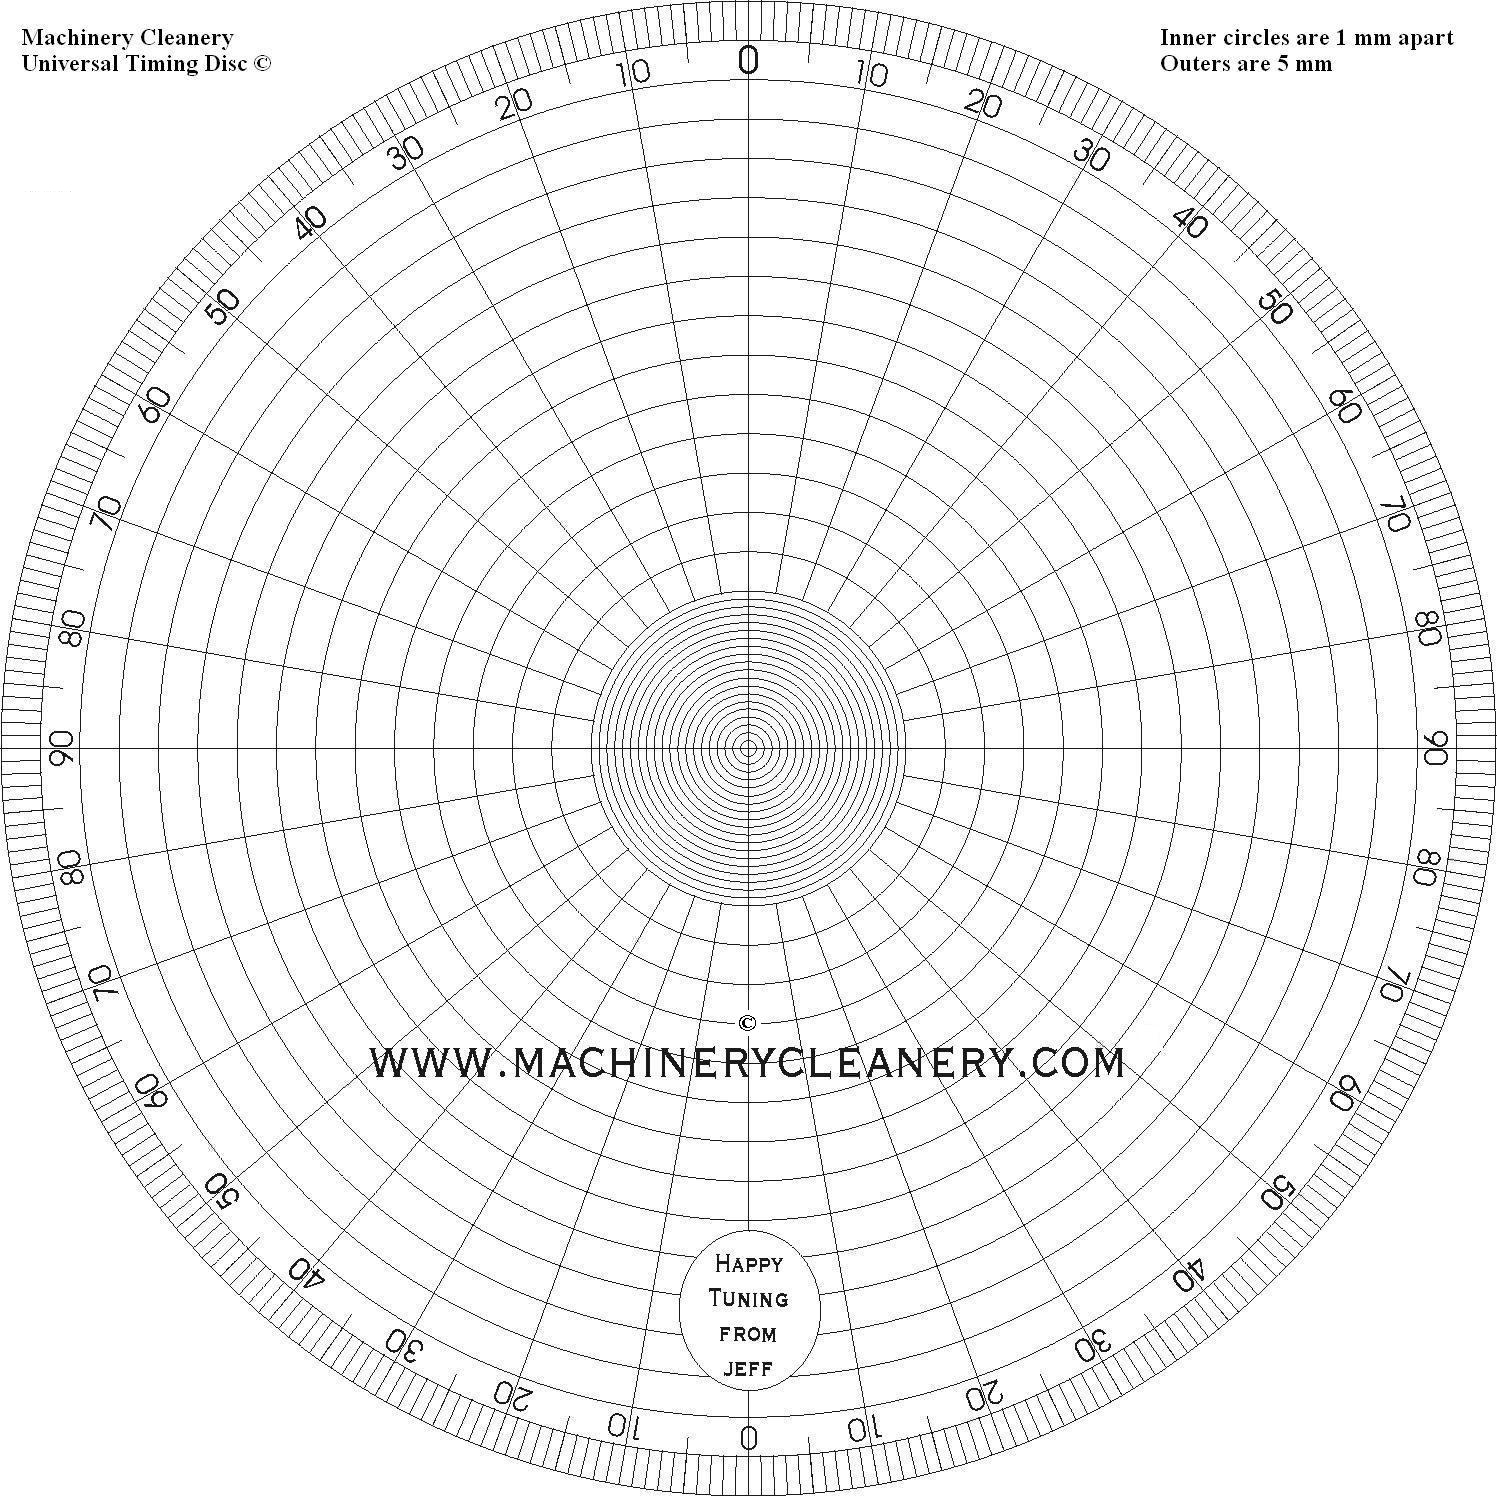 Machinery Cleanery Downloadable Degree Wheel